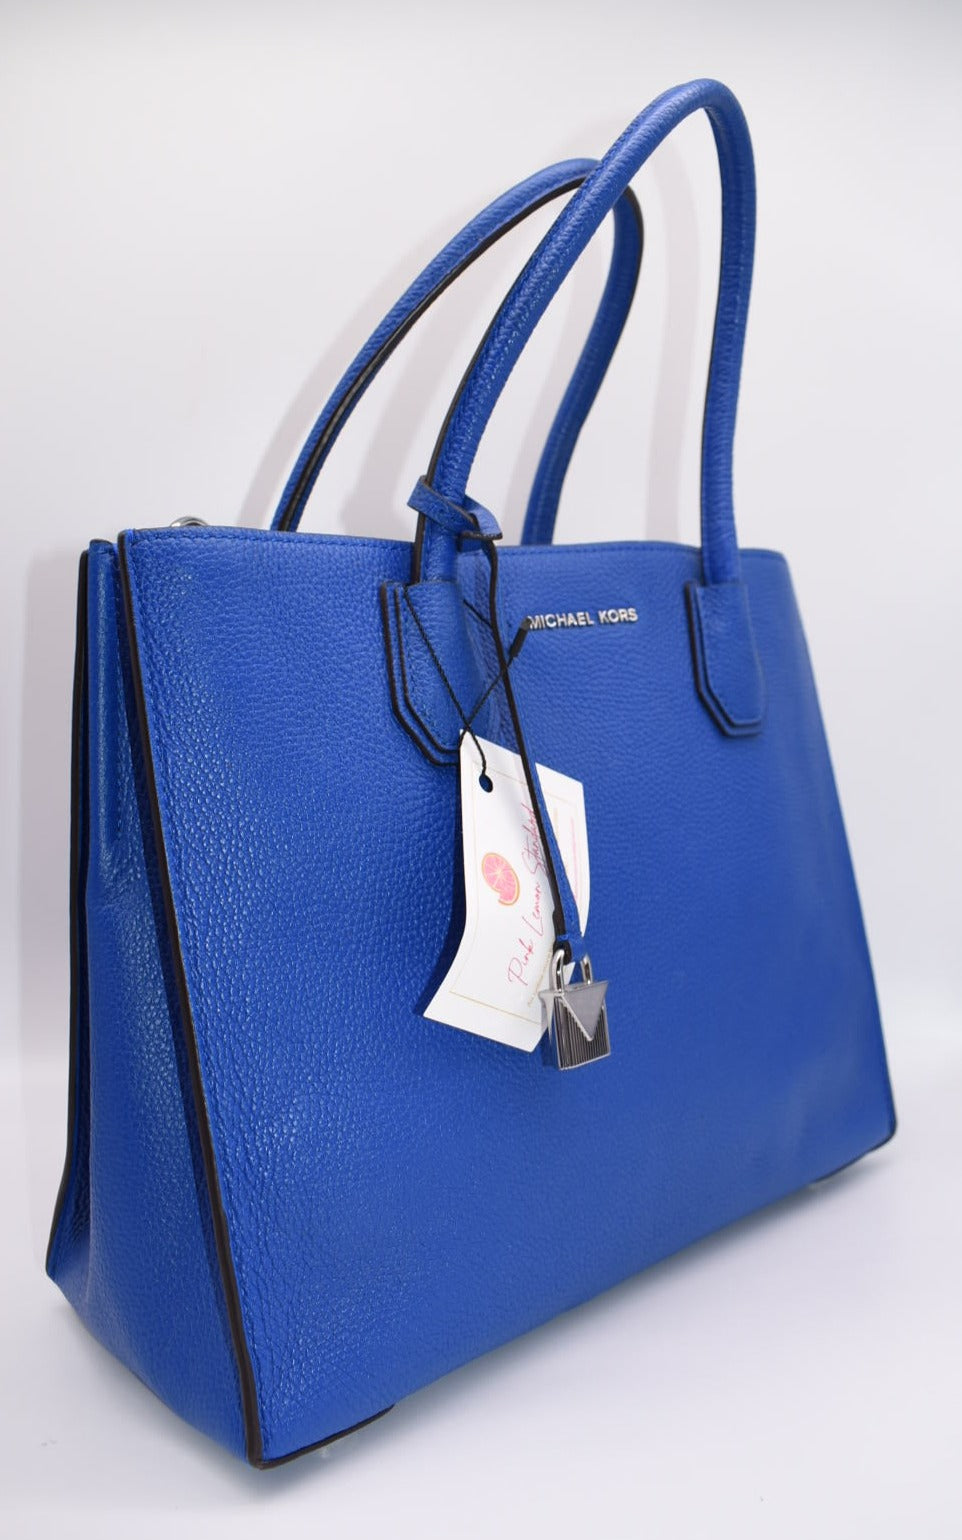 Michael Kors Mercer Large Bonded Leather Tote in Electric Blue